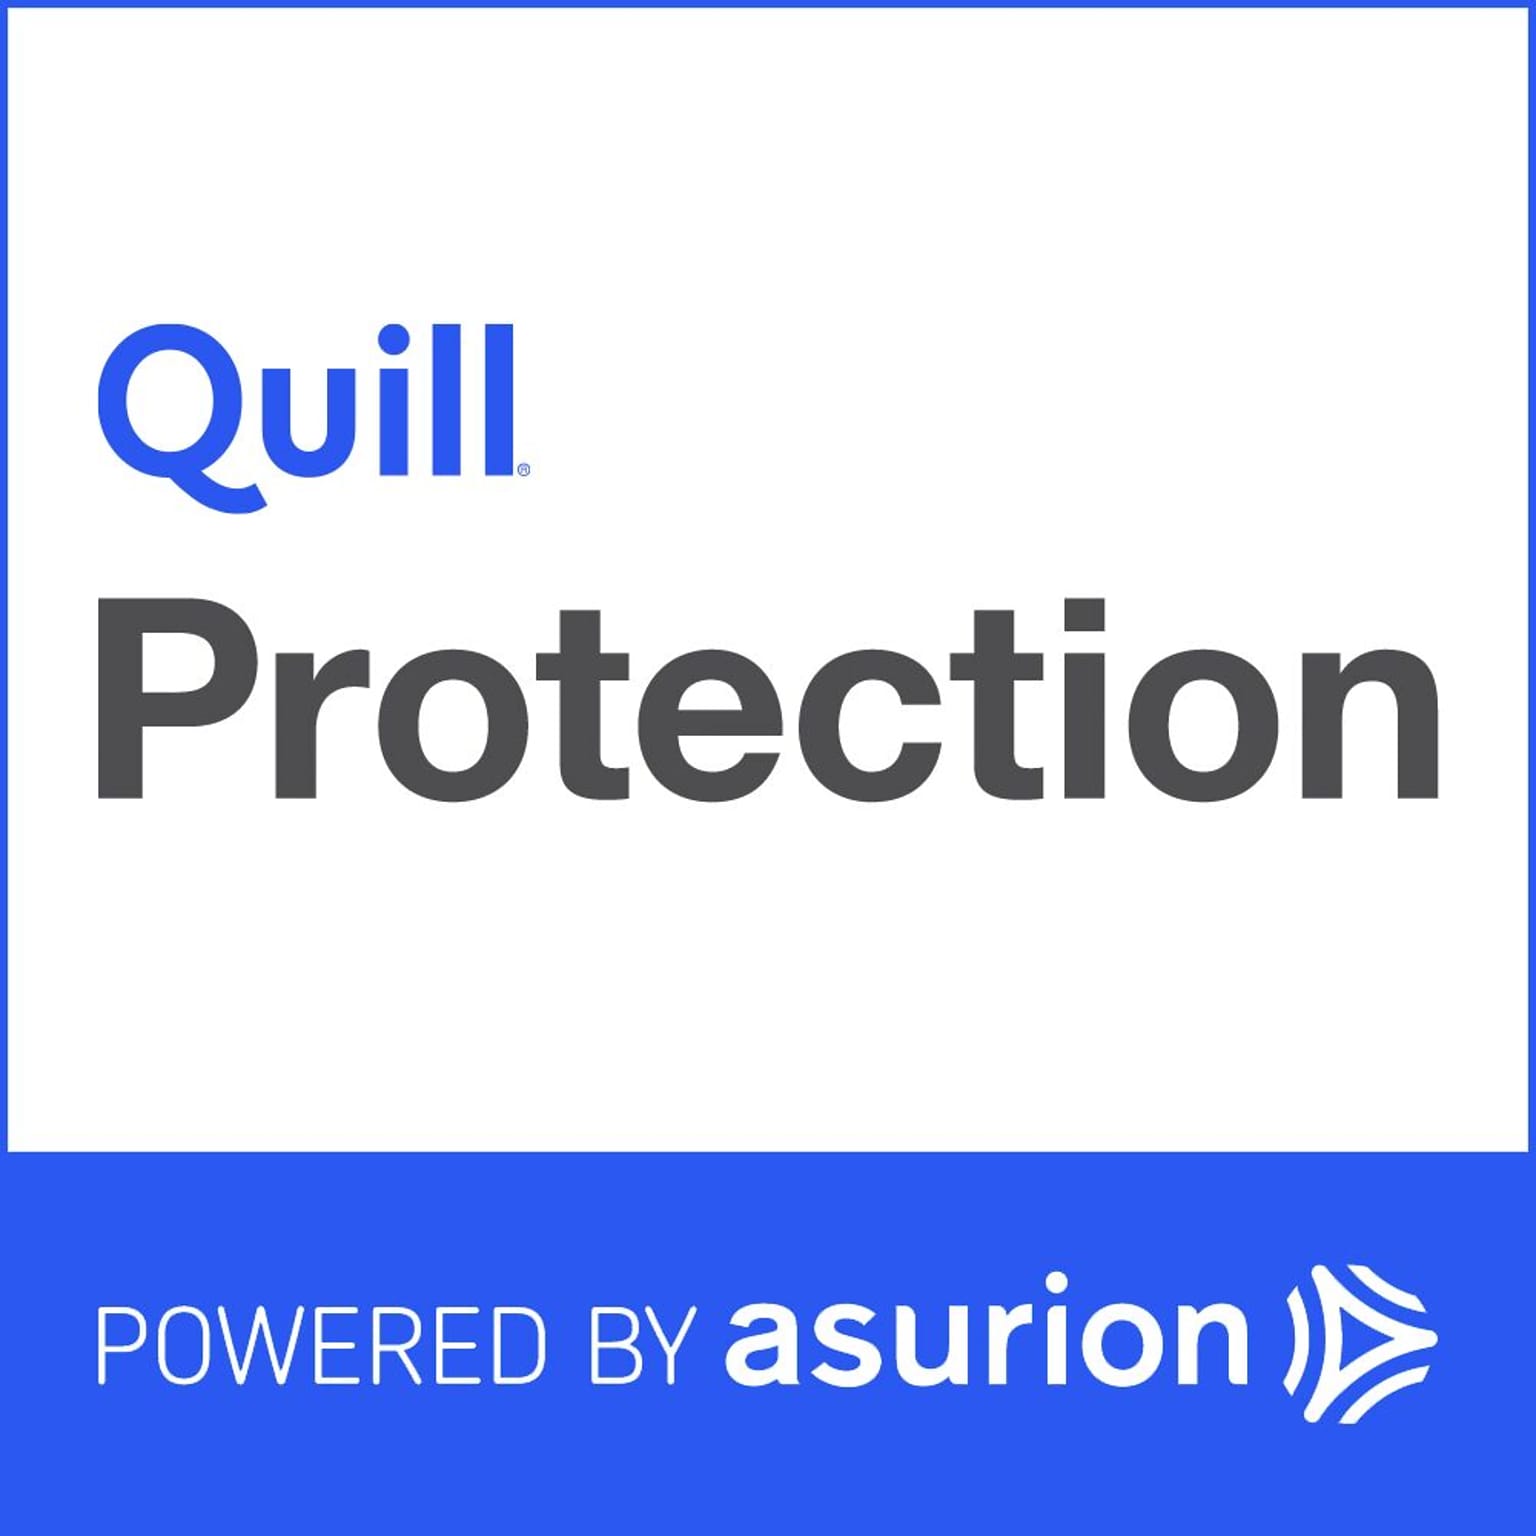 Quill.com 3 Year Furniture Protection Plan $200+